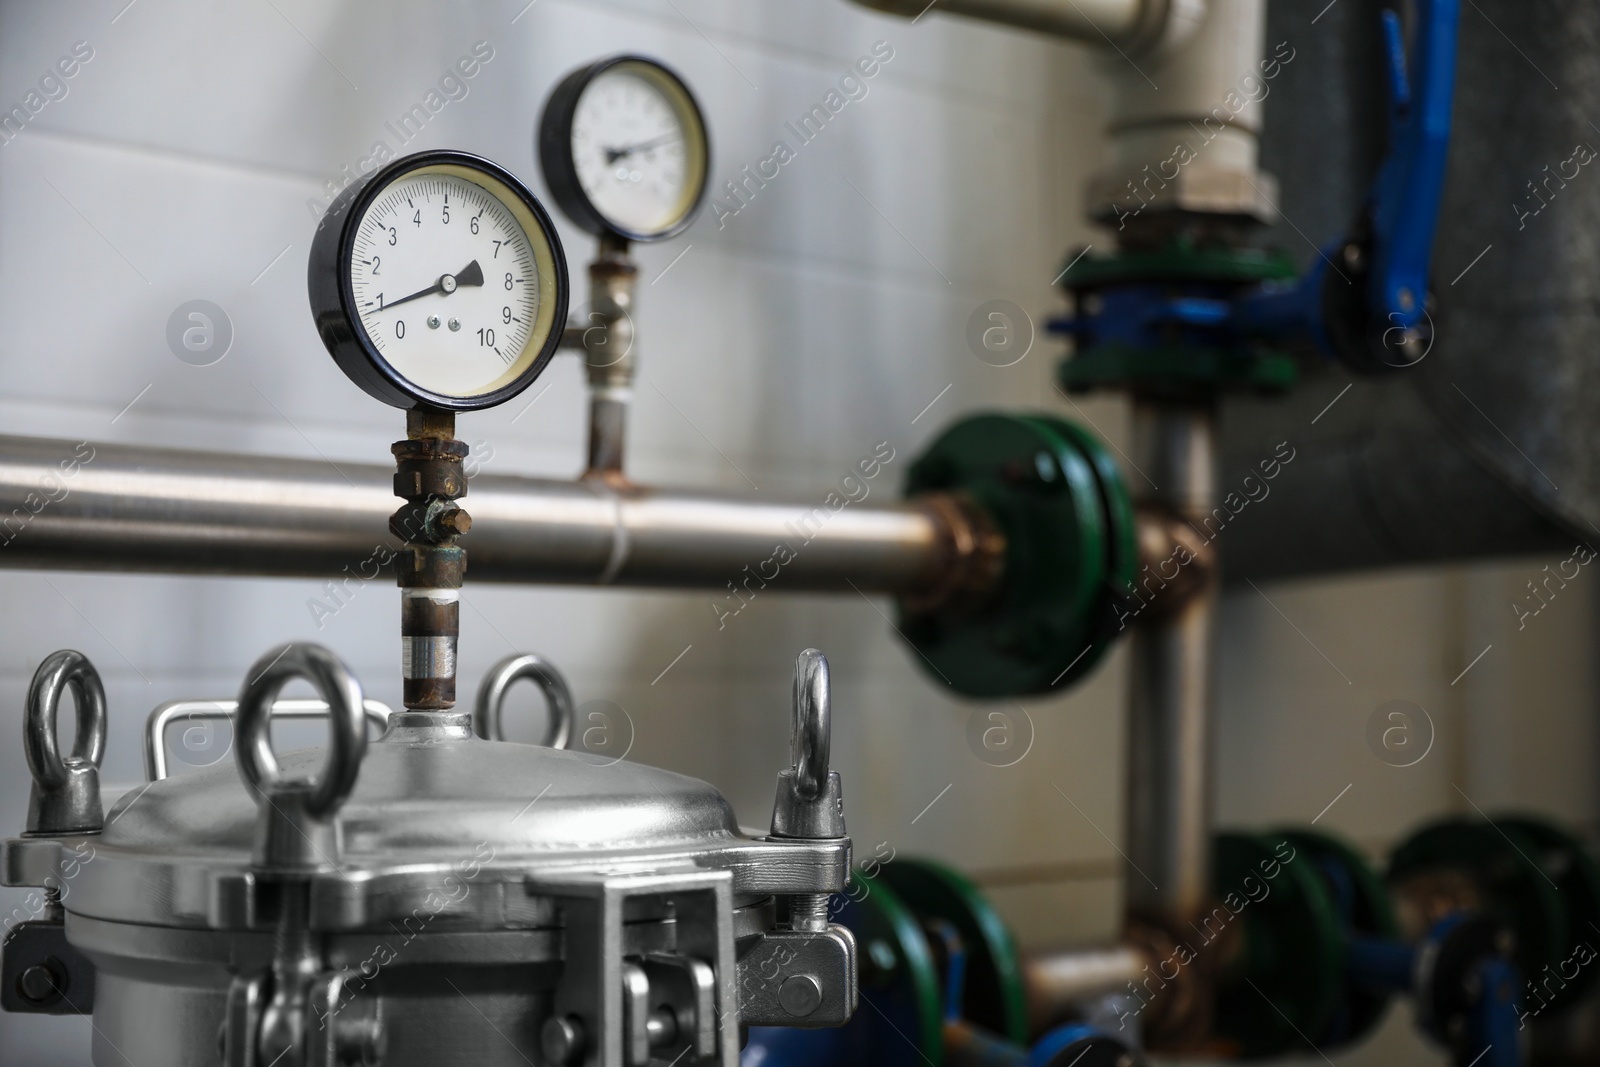 Photo of Pressure gauges and pipes indoors, space for text. Production machinery at modern granary